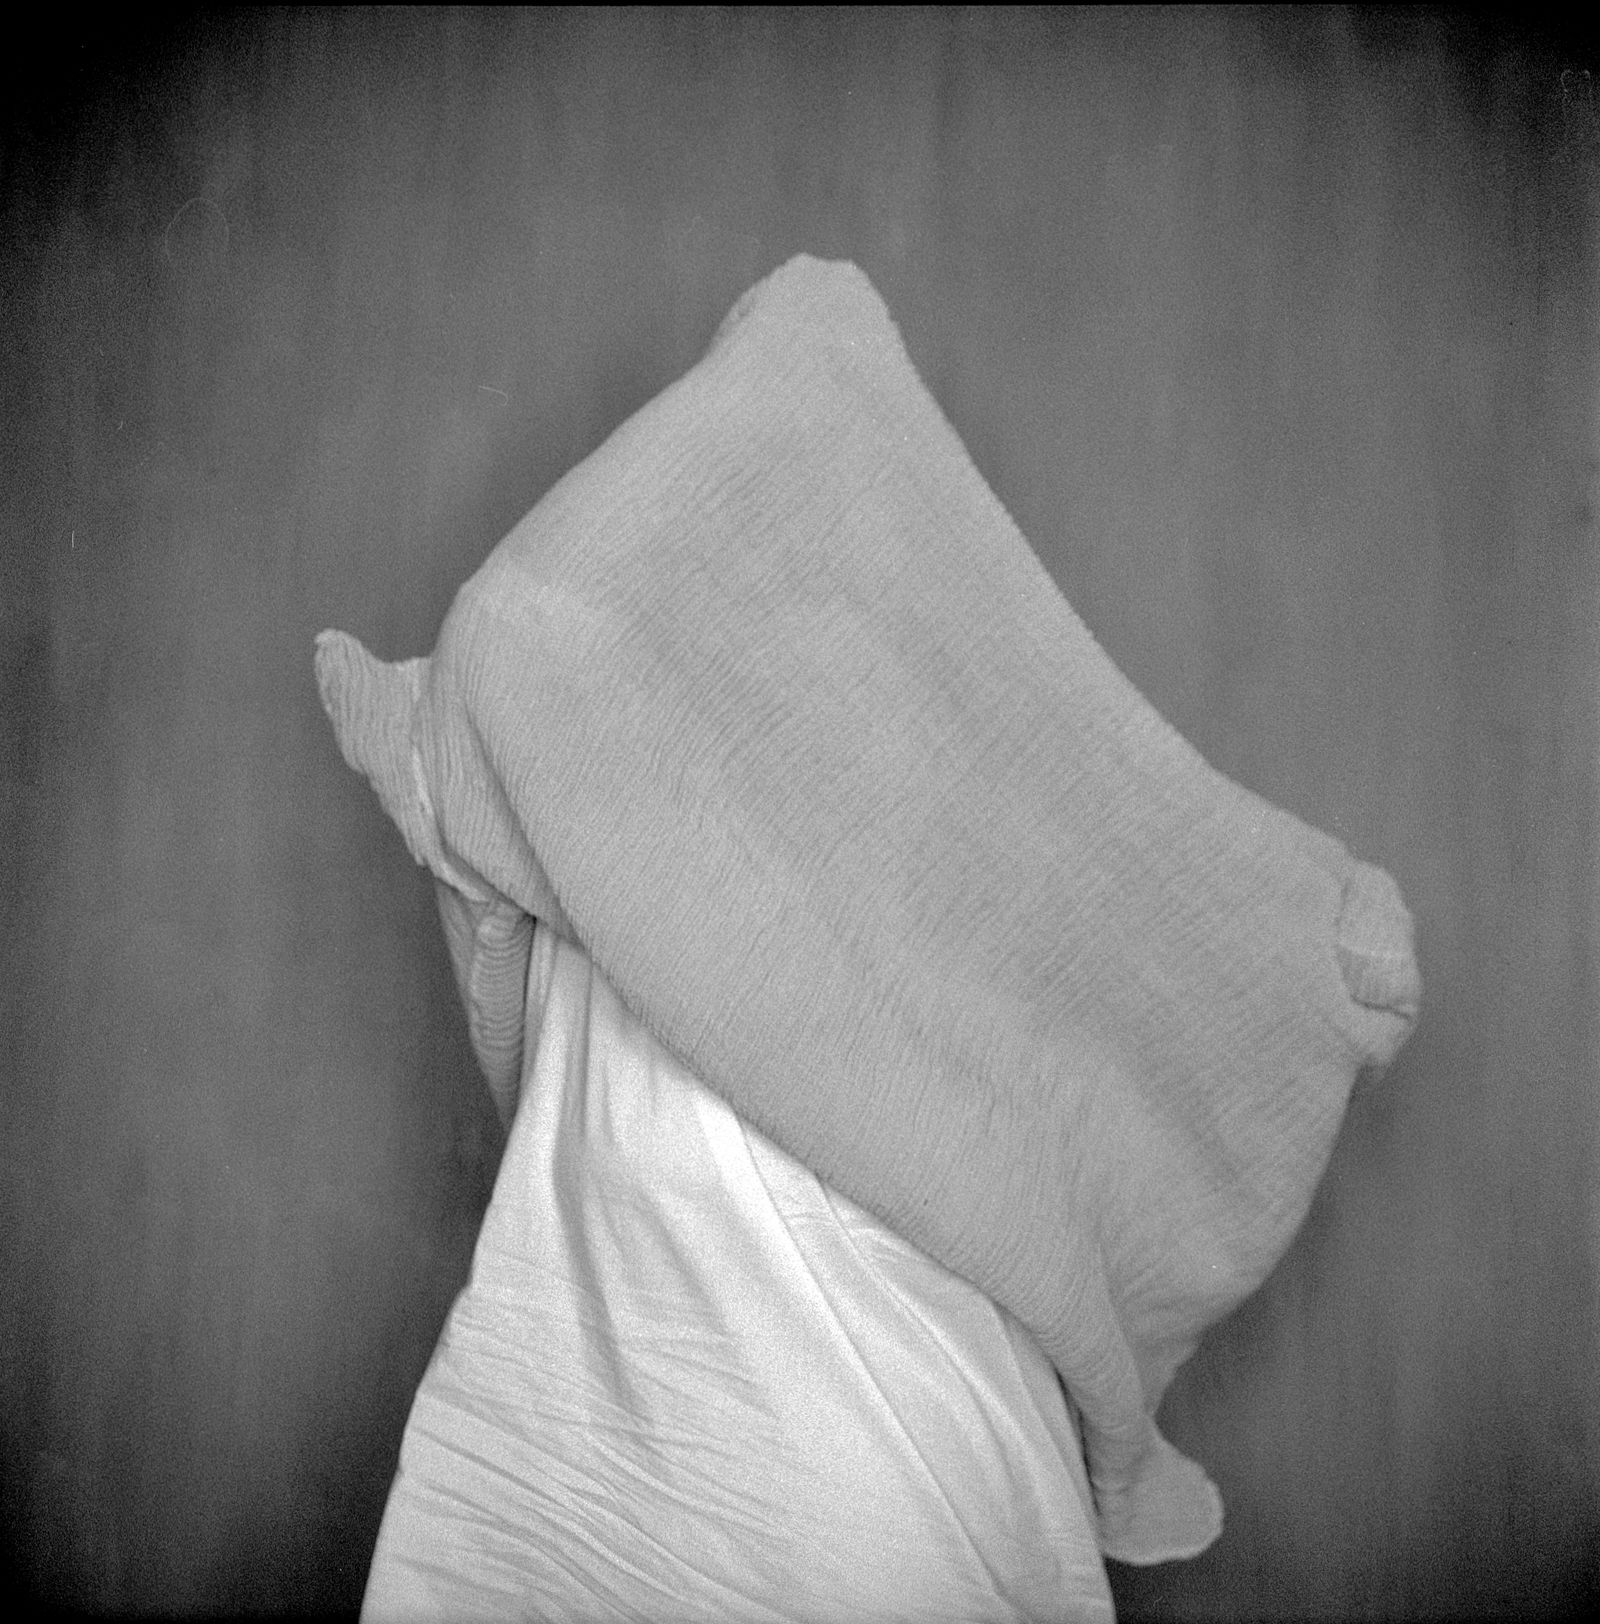 © Anna Karaulova - Image from the In the flesh photography project